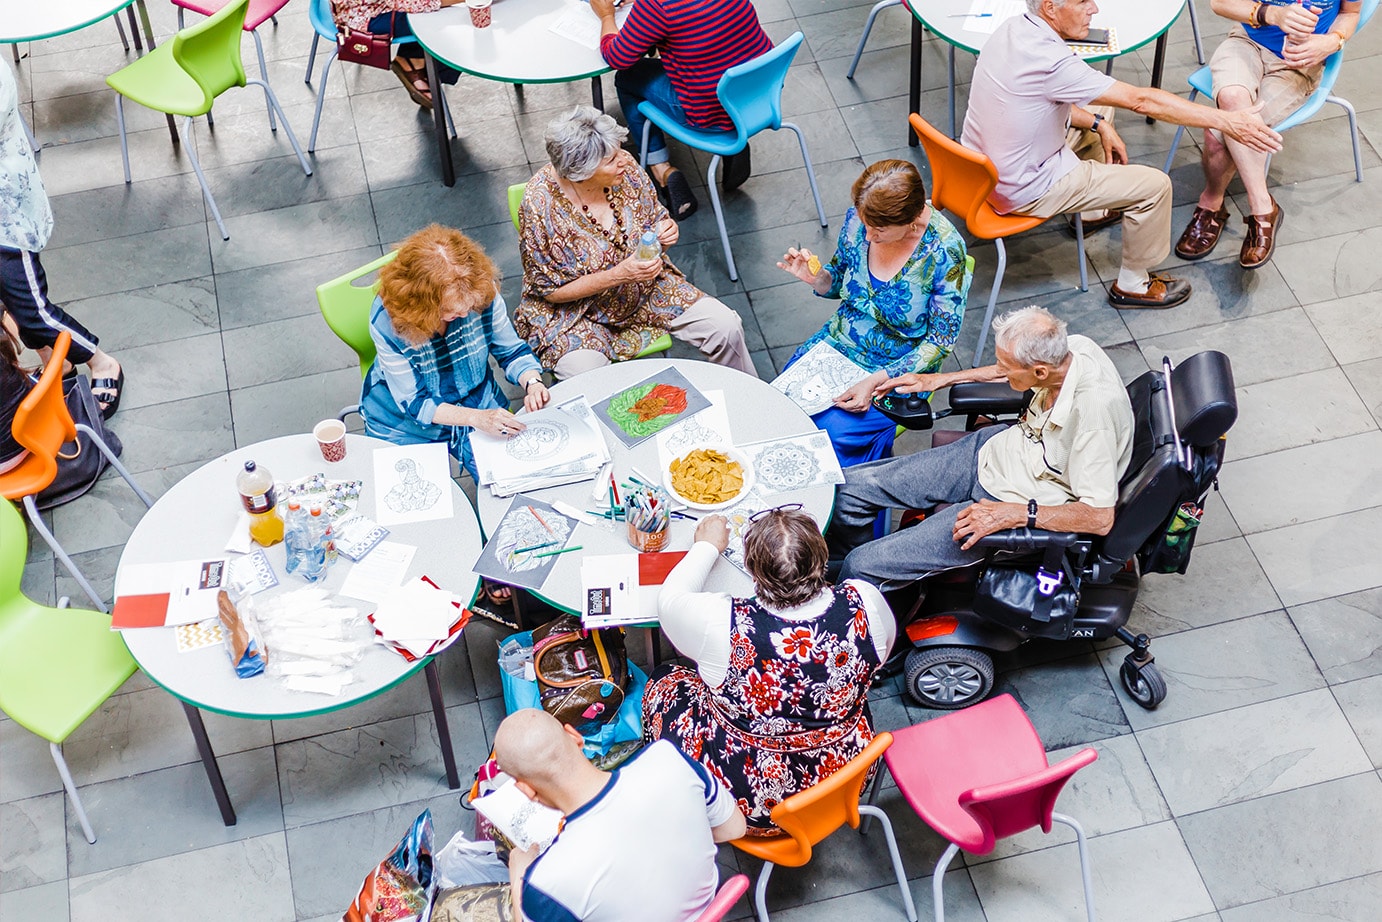 Bird's eye view of the artsdepot cafe. A group of older people are participating in an art activity. They sit on colourful chairs with a large bowl of nachos in the centre of the table.